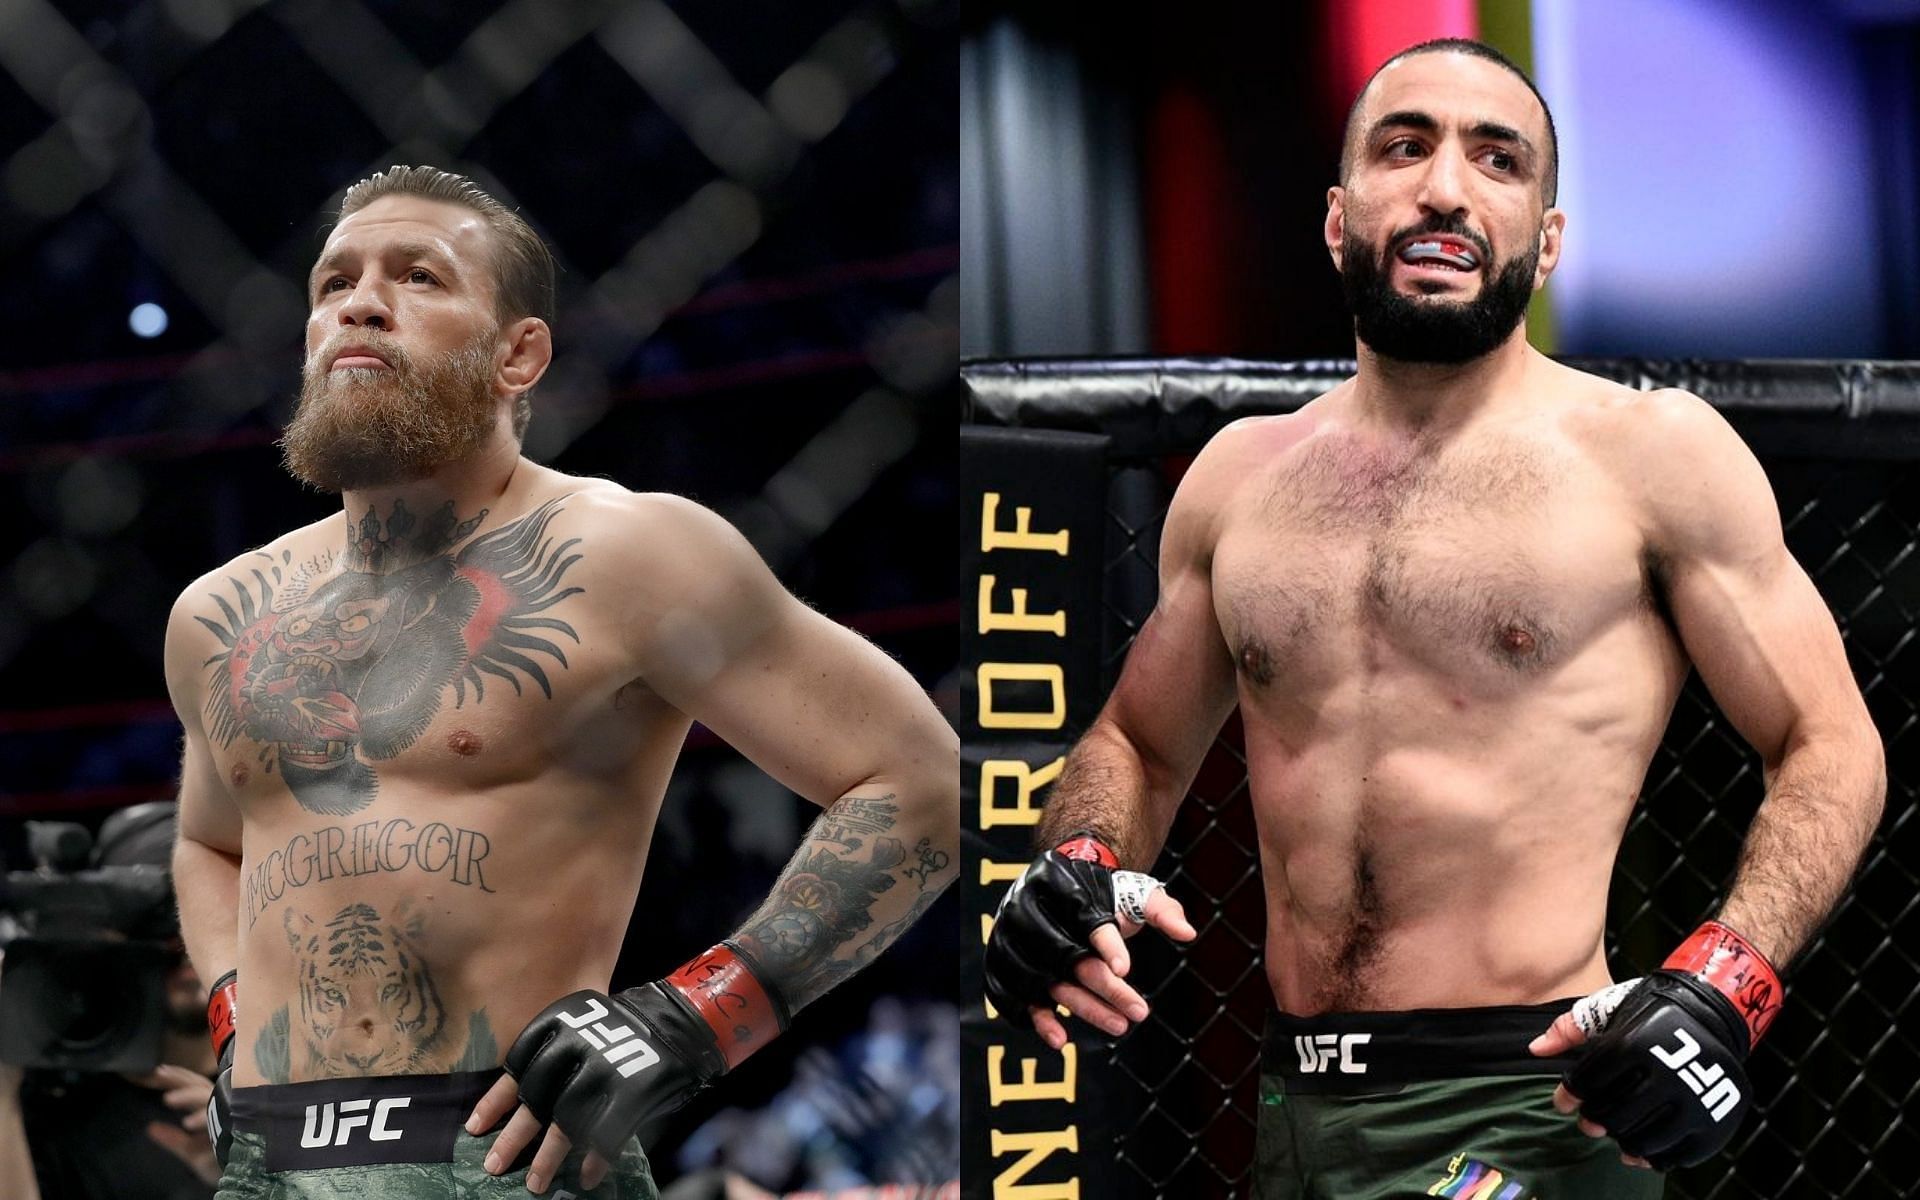 Conor McGregor (left), Belal Muhammad (right) [Sources: mmajunkie, Bloody Elbow]